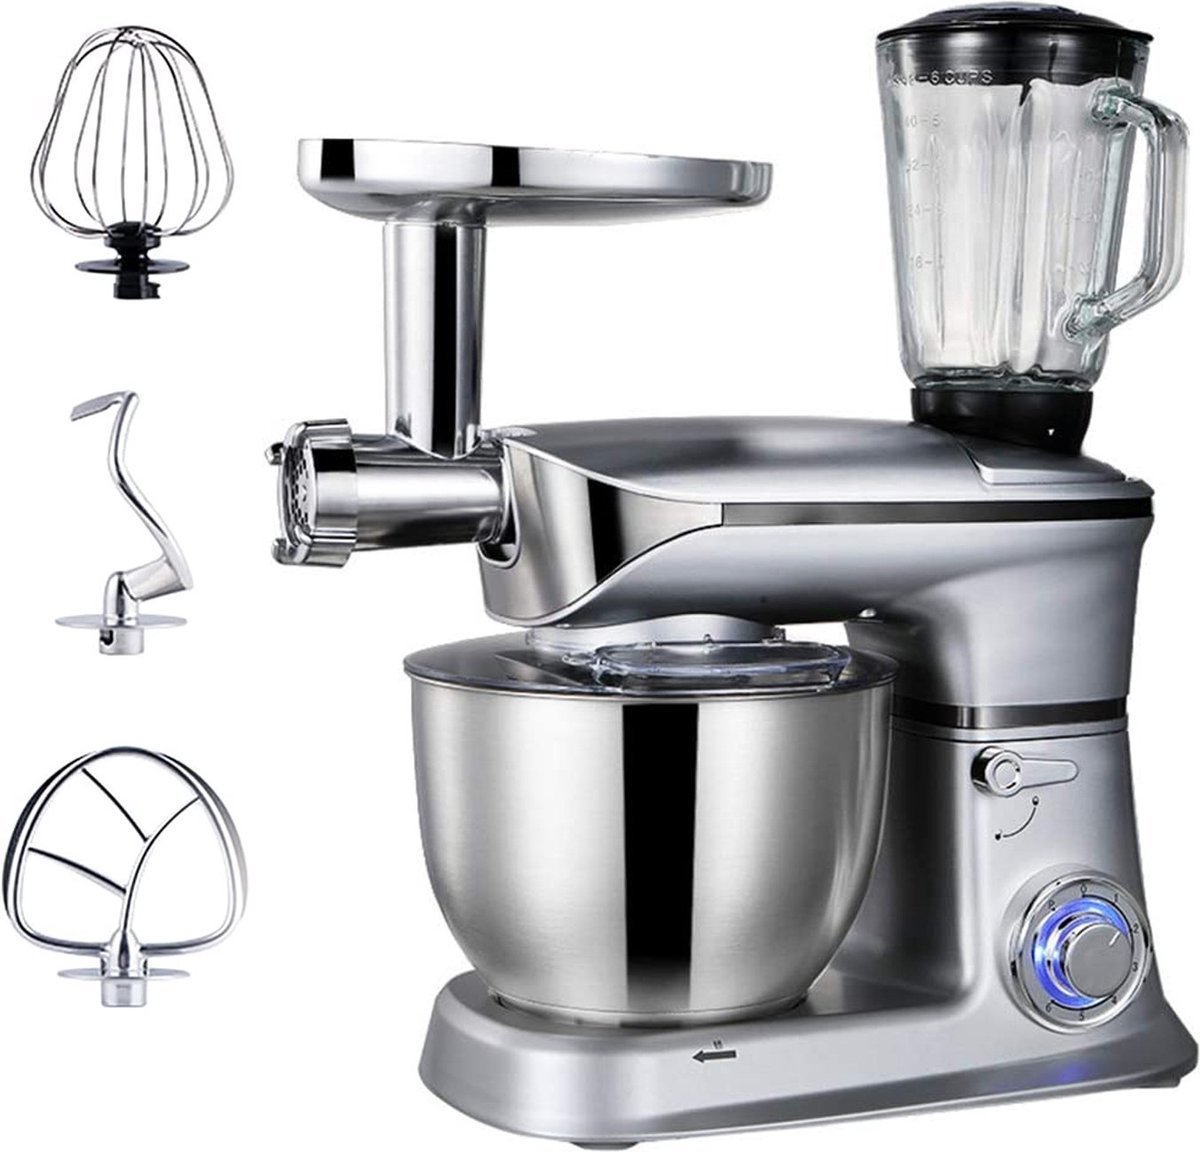 Planetary Mixer With Blender, Meat Grinder, Whisk, Dough Hook, Mixing Hook - 1900W - 6.5 Liters - Silver - Royalty Line